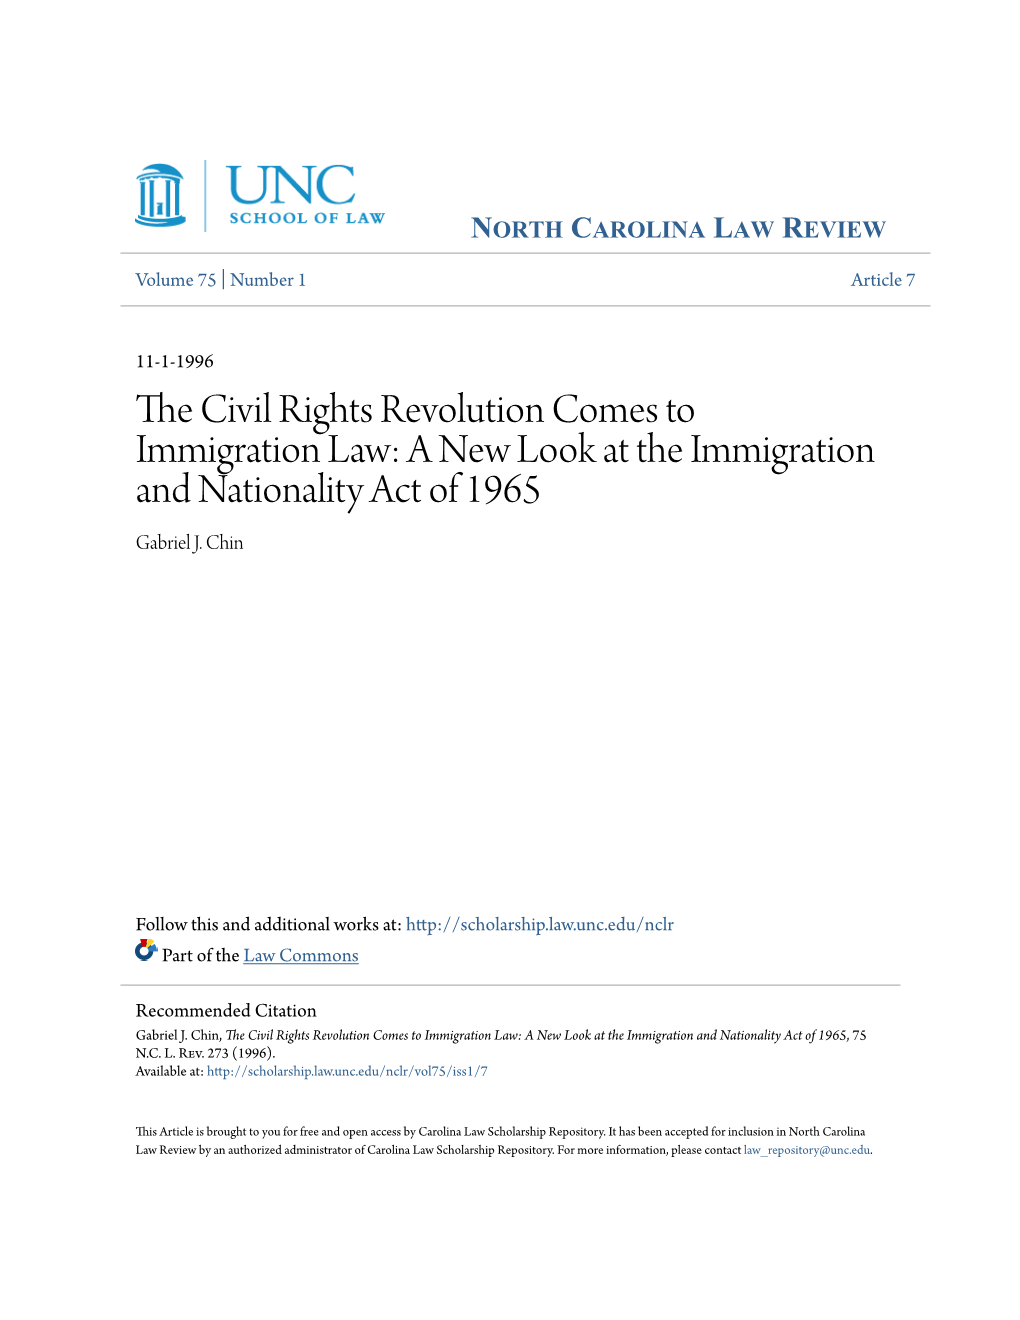 A New Look at the Immigration and Nationality Act of 1965 Gabriel J